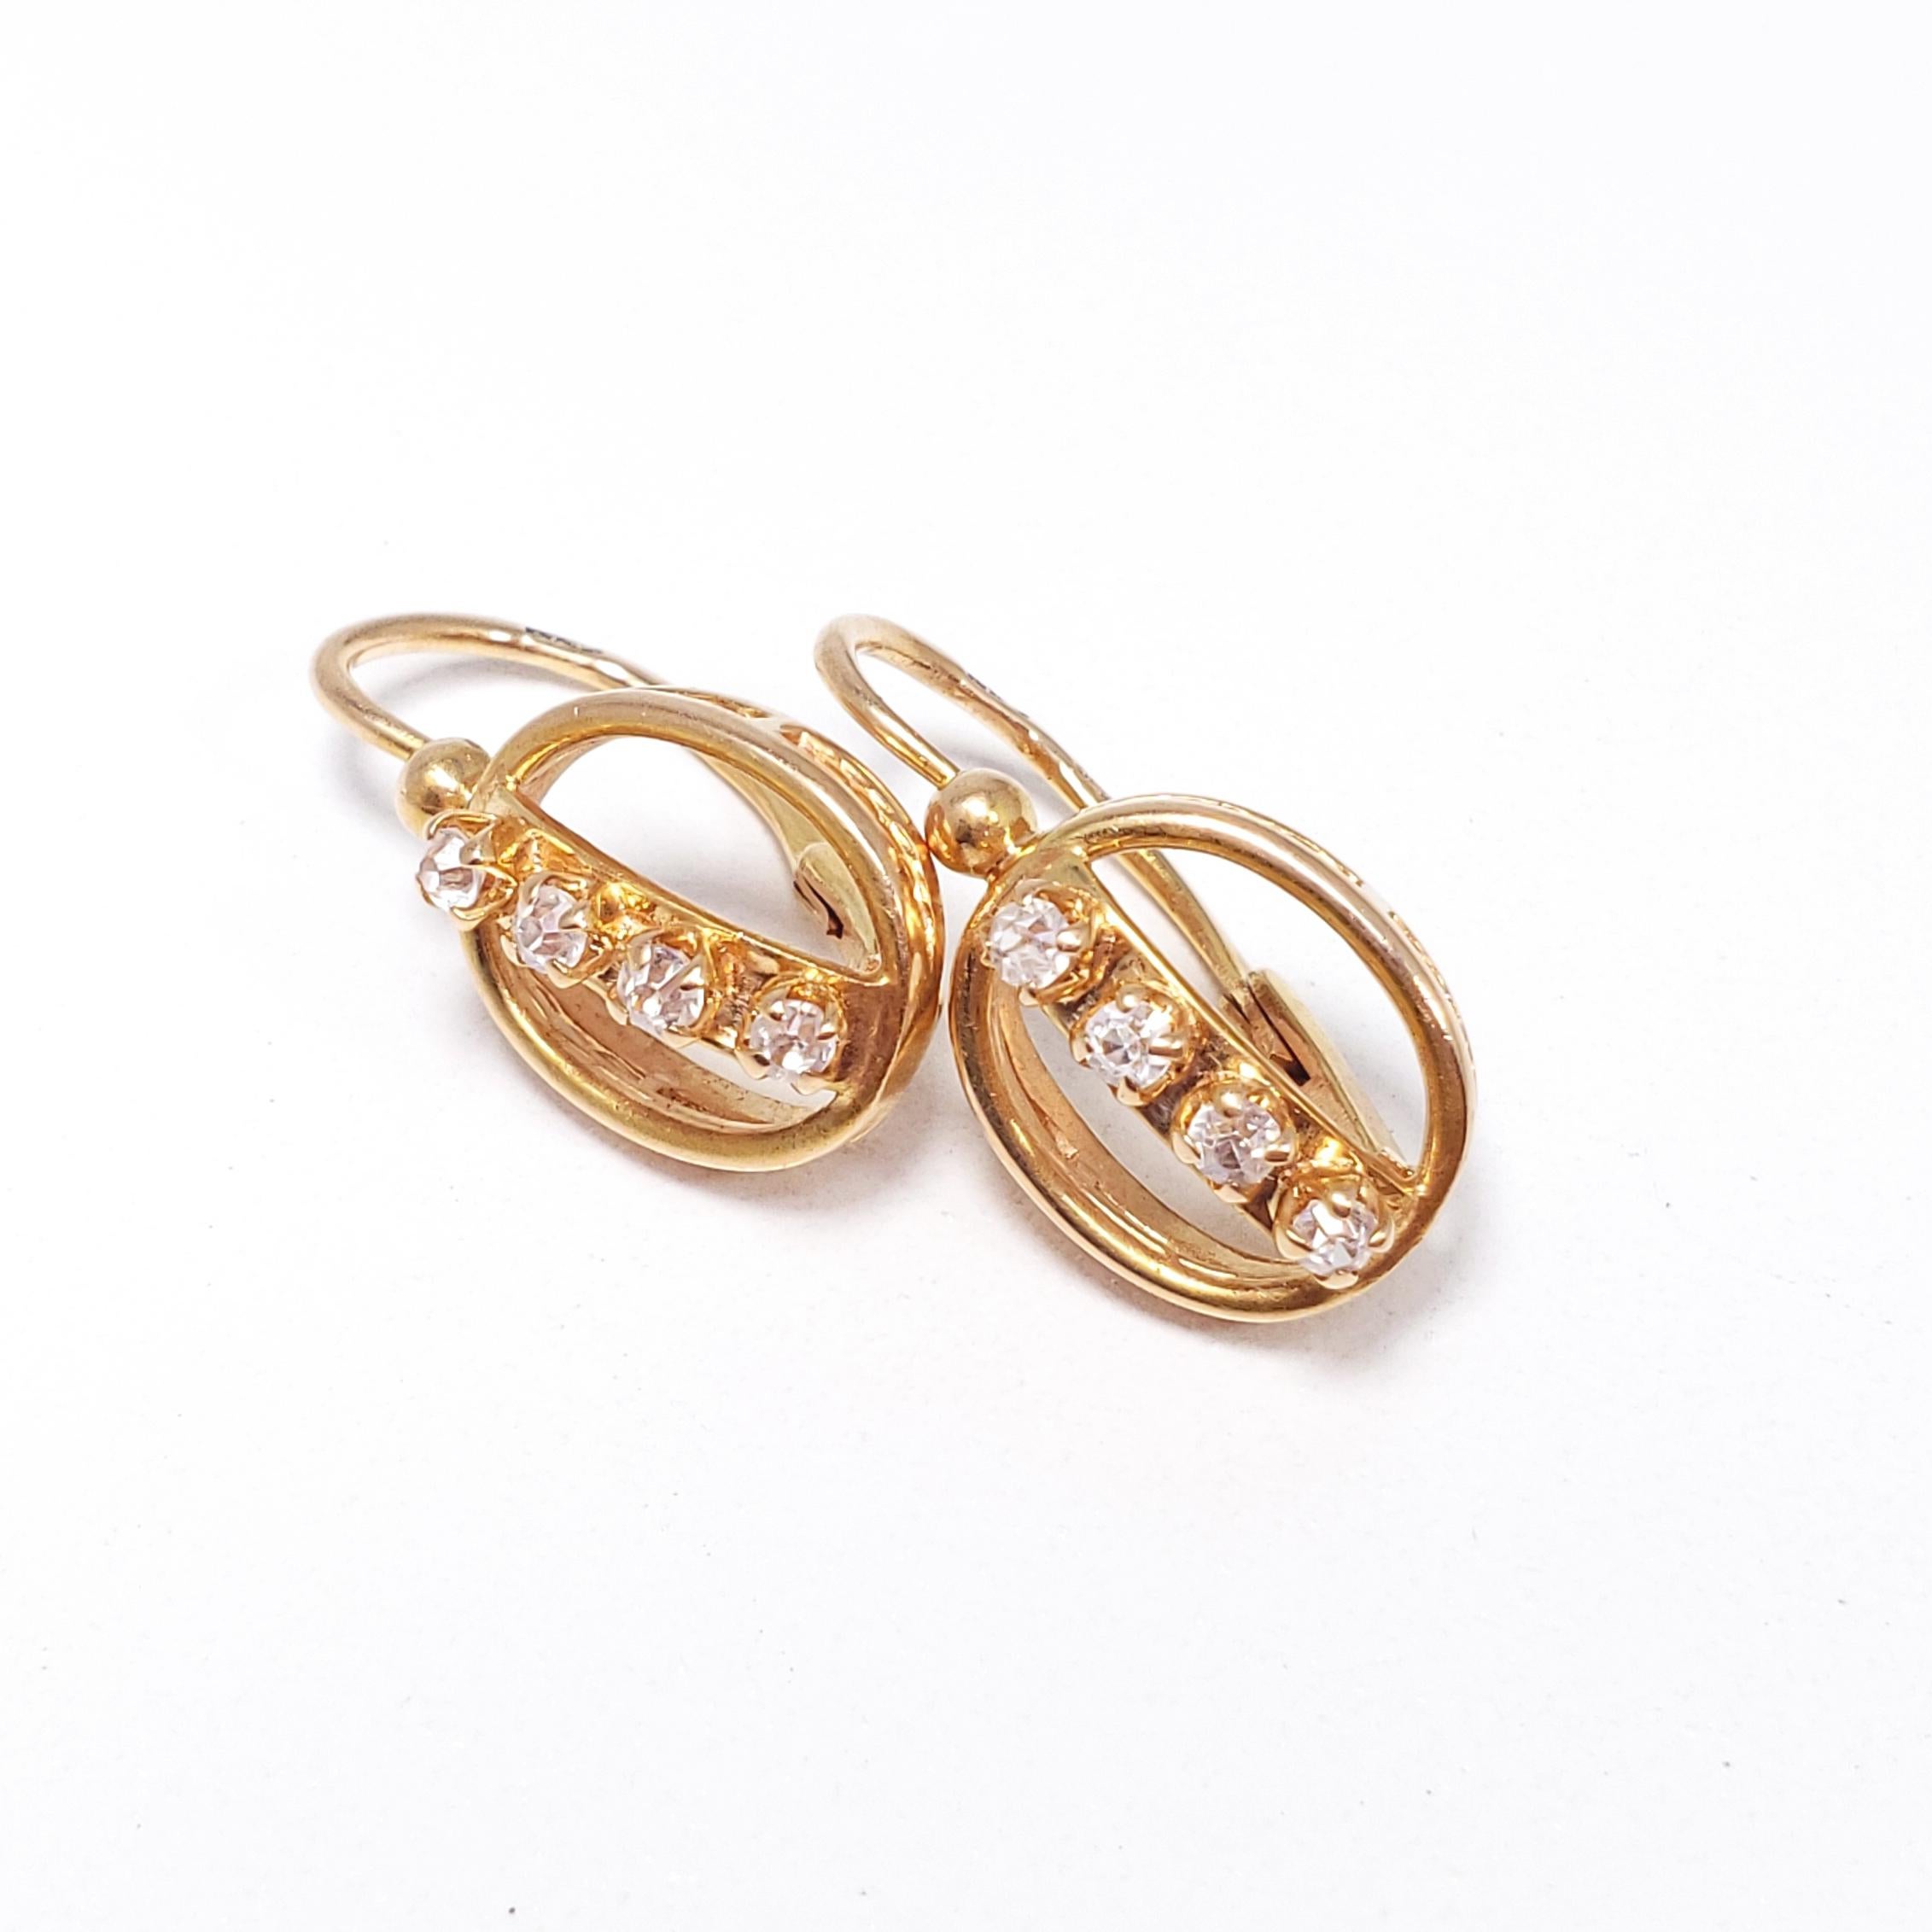 A pair of 583 gold earrings, each accented with 4 prong set Fianit stones. The Soviet's breakthrough technique of producing Fianit in 1973 later became popularized throughout the world - today,  the gem is most popularly known as cubic